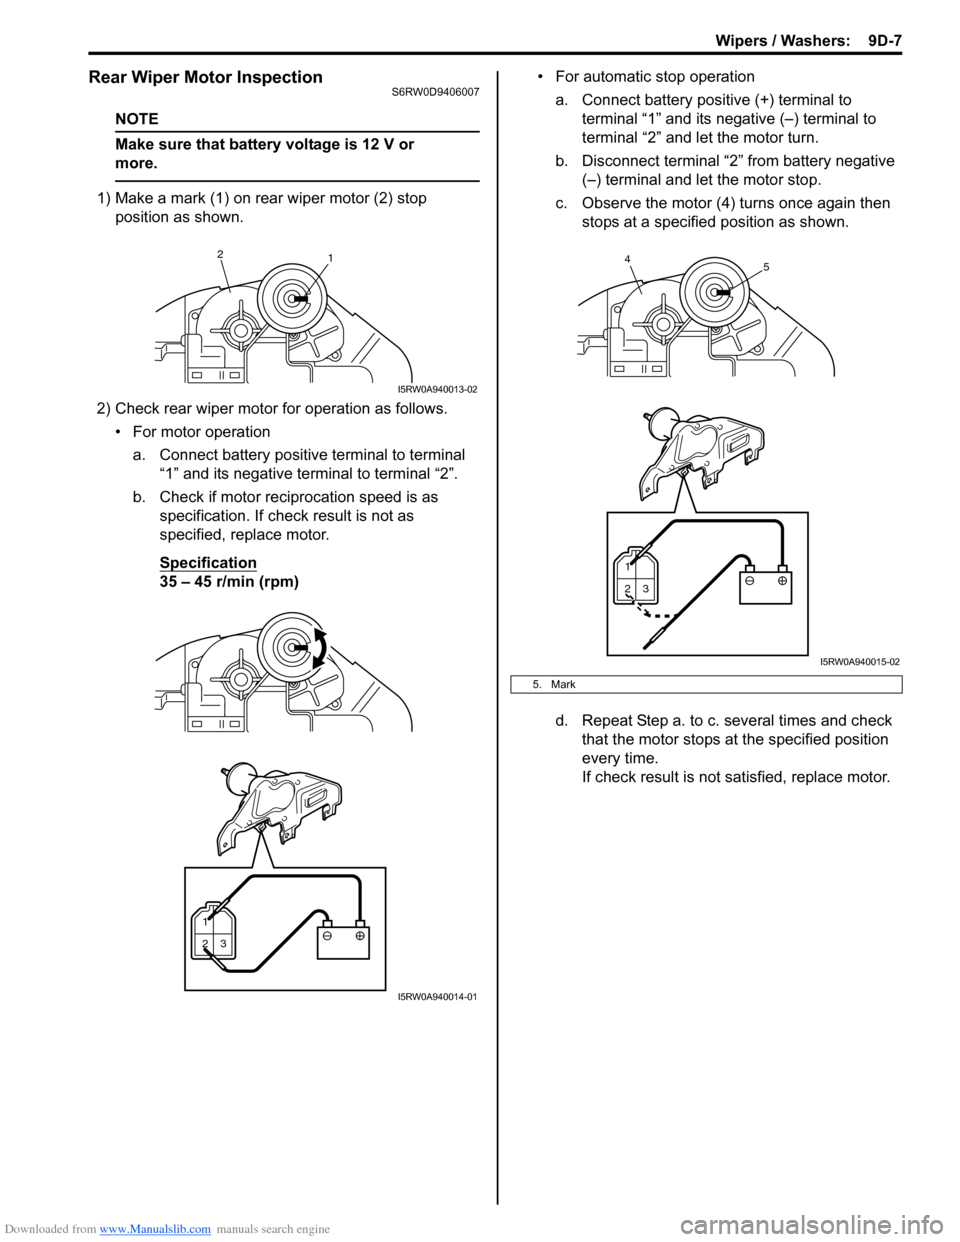 SUZUKI SX4 2006 1.G Service Workshop Manual Downloaded from www.Manualslib.com manuals search engine Wipers / Washers:  9D-7
Rear Wiper Motor InspectionS6RW0D9406007
NOTE
Make sure that battery voltage is 12 V or 
more.
 
1) Make a mark (1) on 